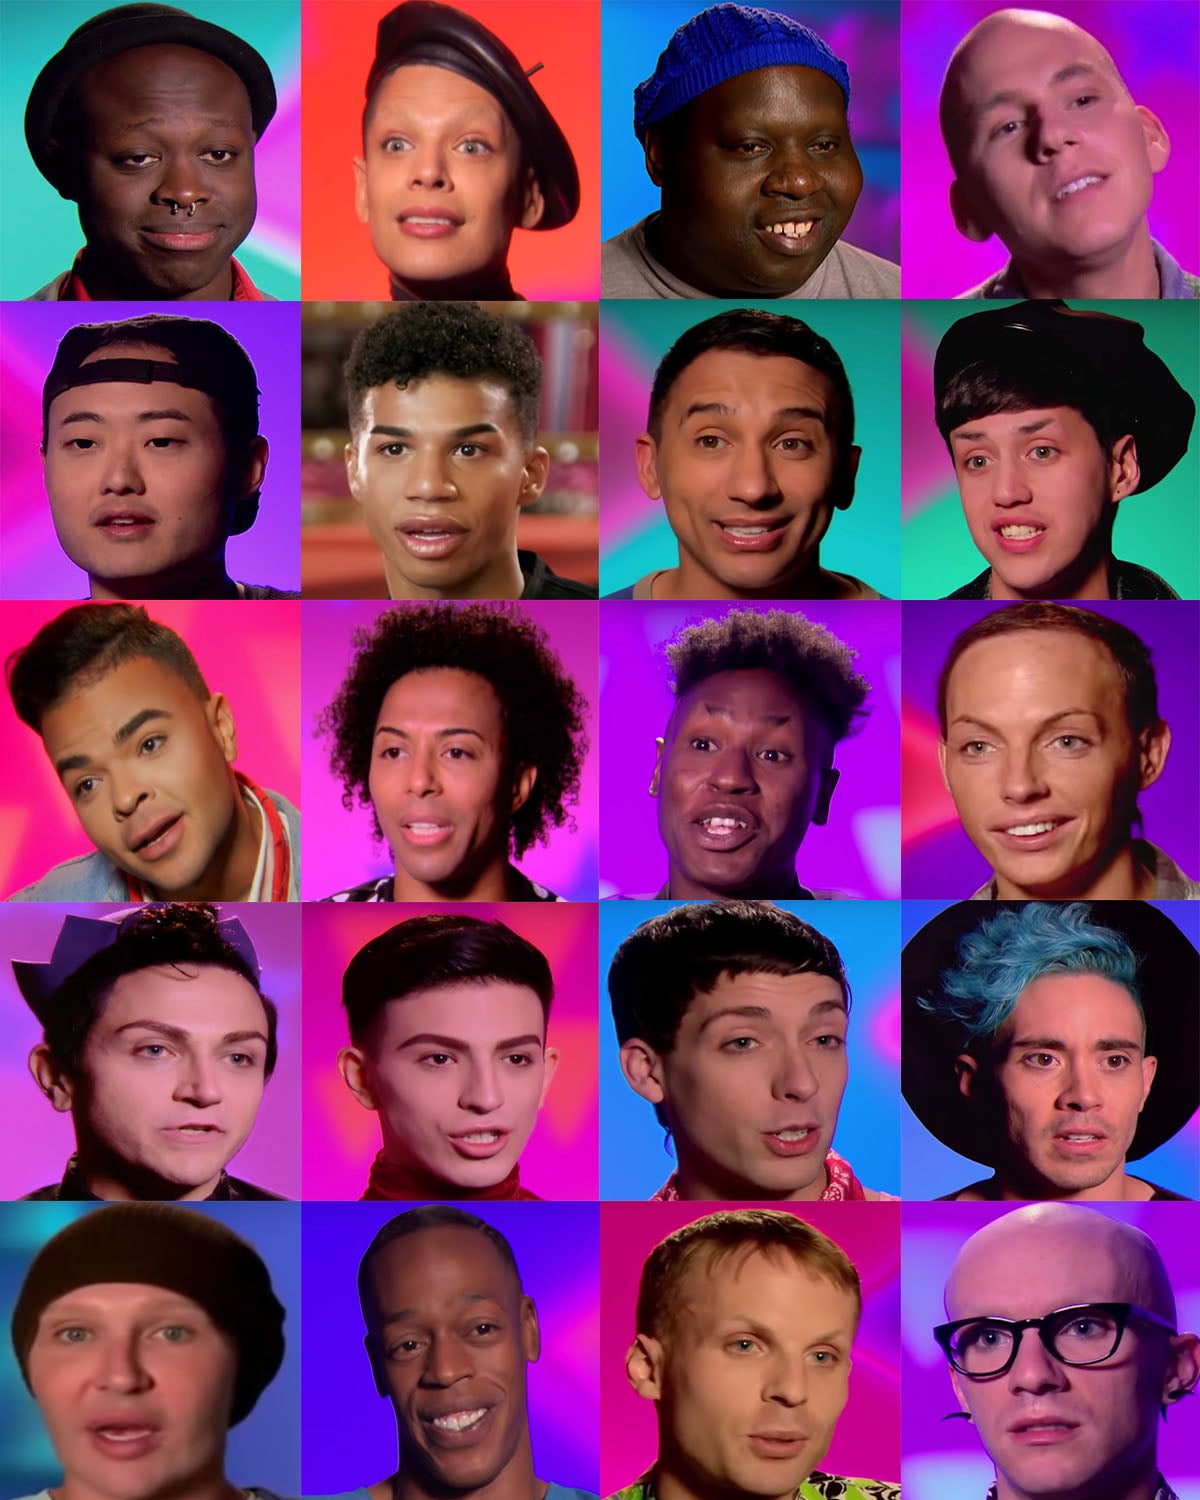 Only Rupaul S Drag Race Superfans Can Identify These 20 Queens